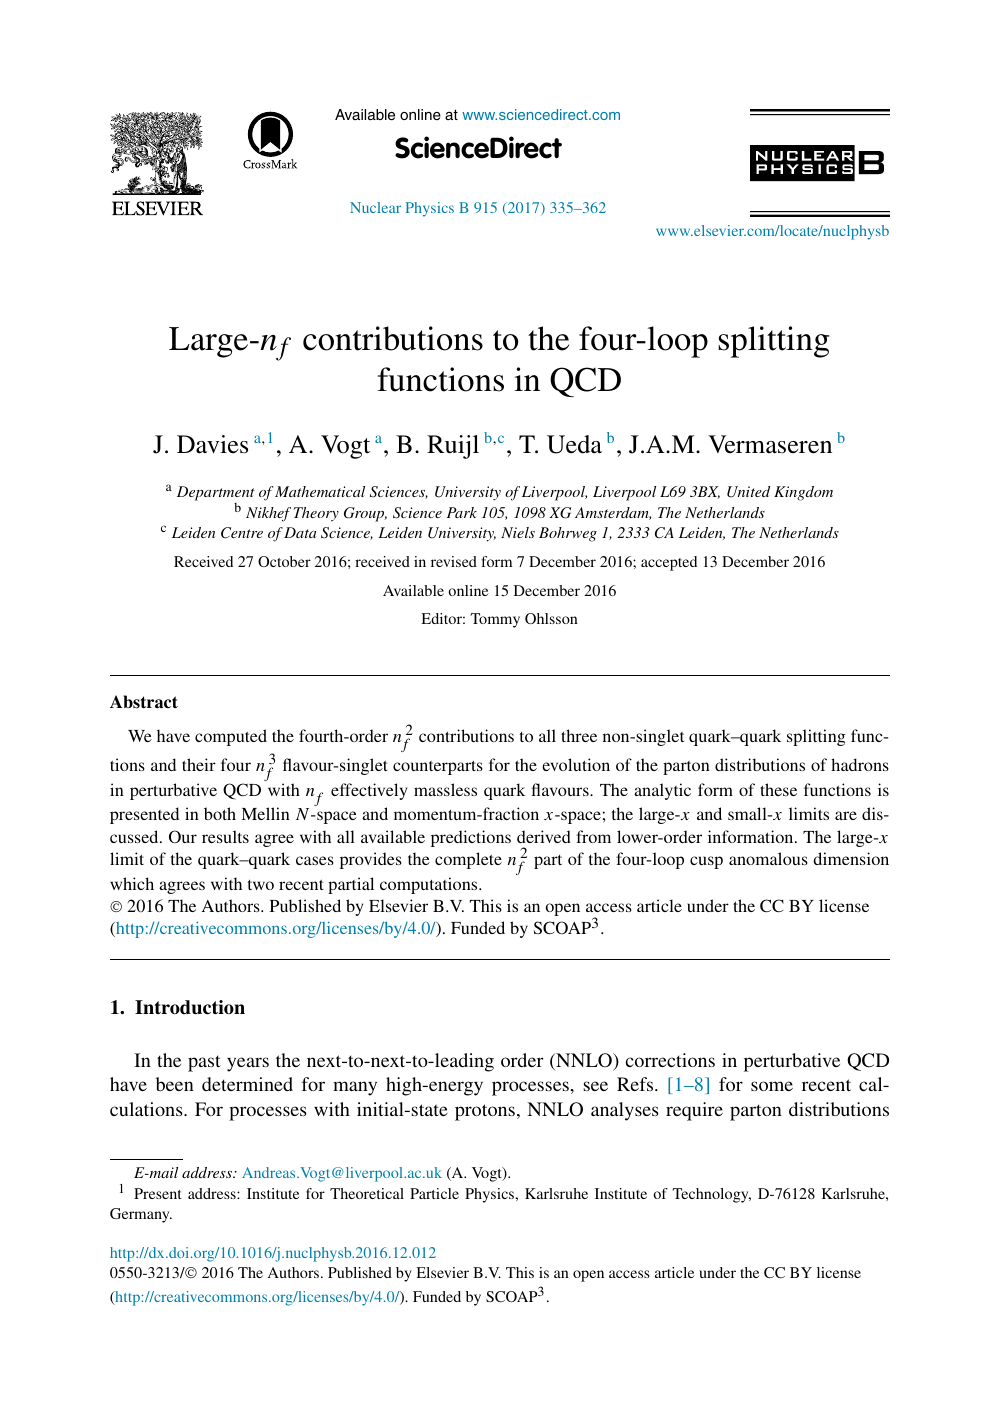 Large Nf Contributions To The Four Loop Splitting Functions In Qcd Topic Of Research Paper In Physical Sciences Download Scholarly Article Pdf And Read For Free On Cyberleninka Open Science Hub